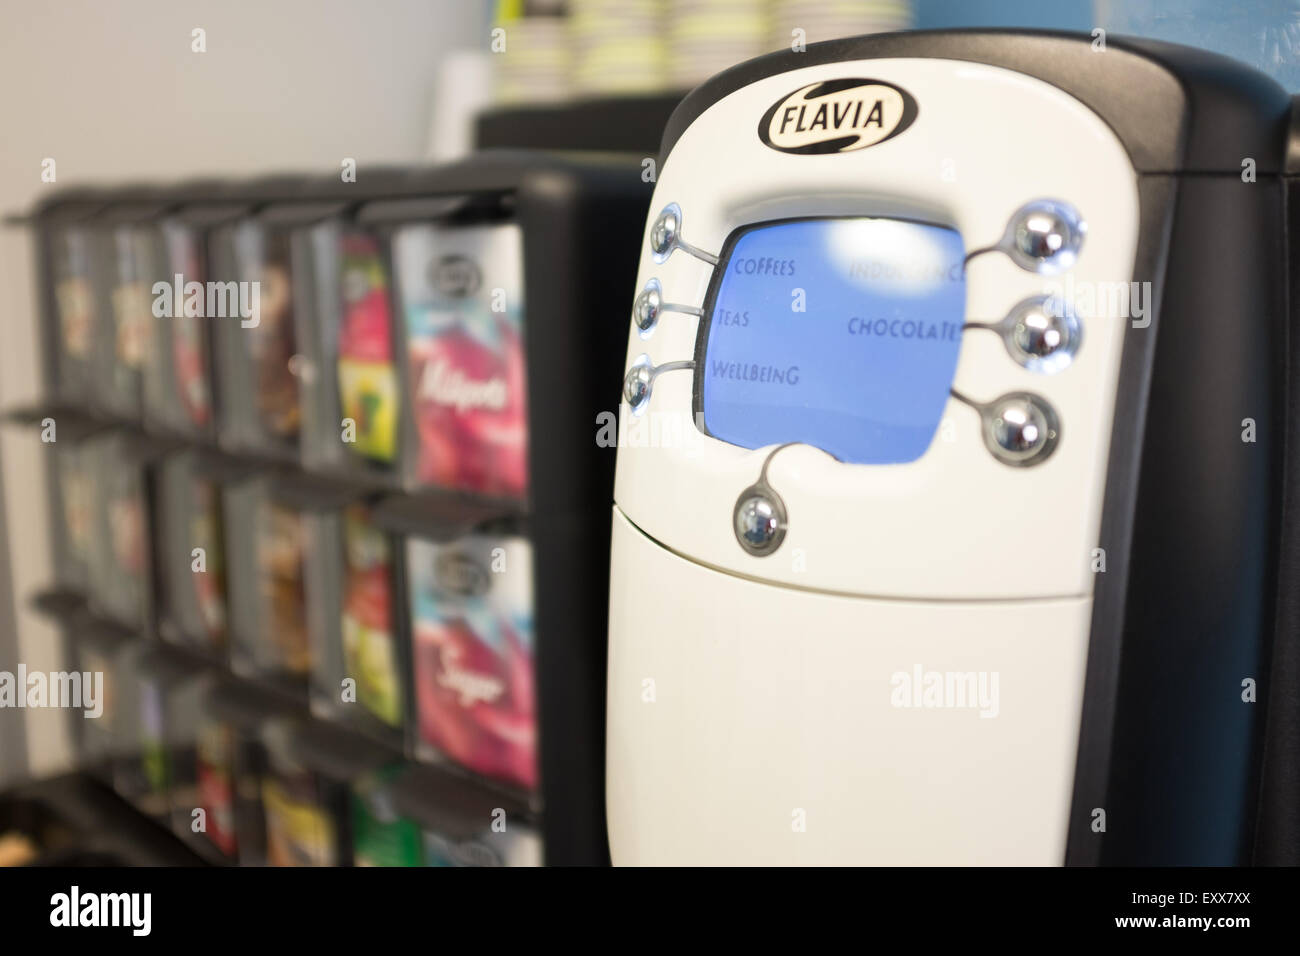 Flavia coffee machine, with a wide selection of sachets Stock Photo